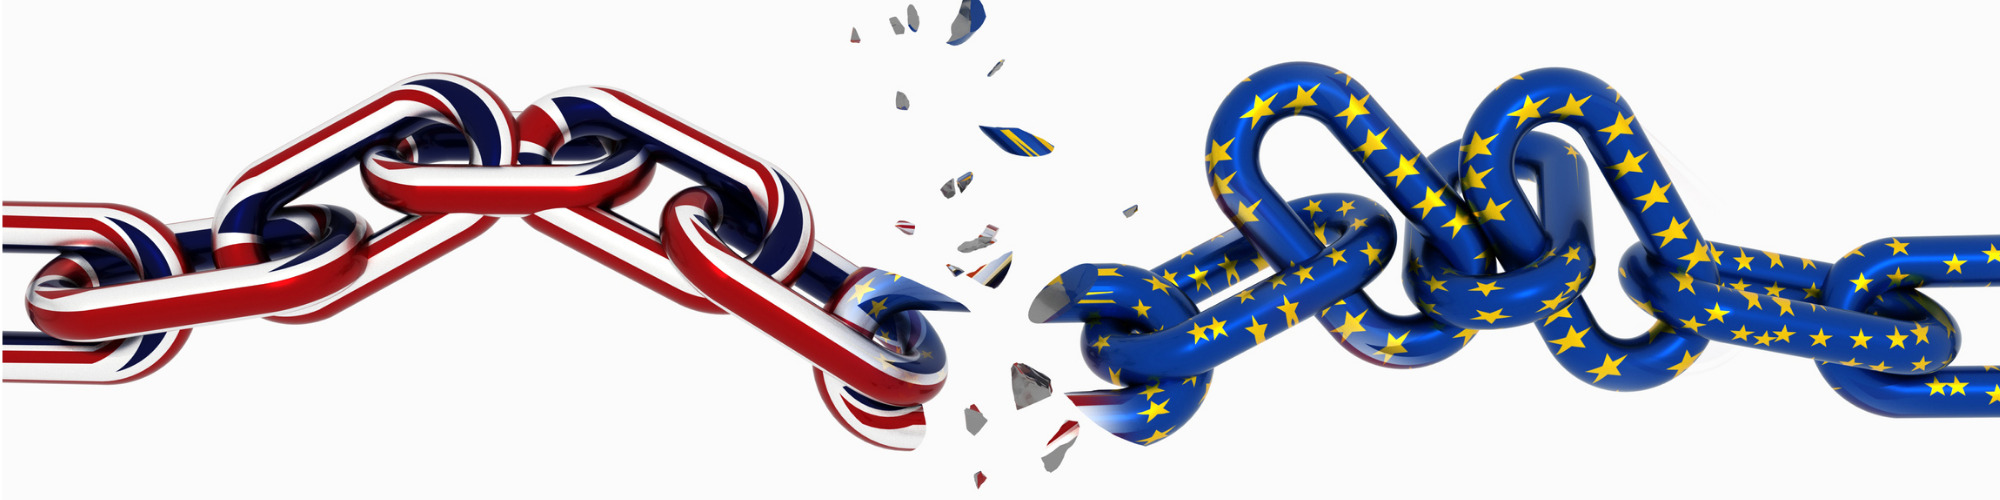 Cross-Border Insolvency & Brexit - Challenges & Opportunities